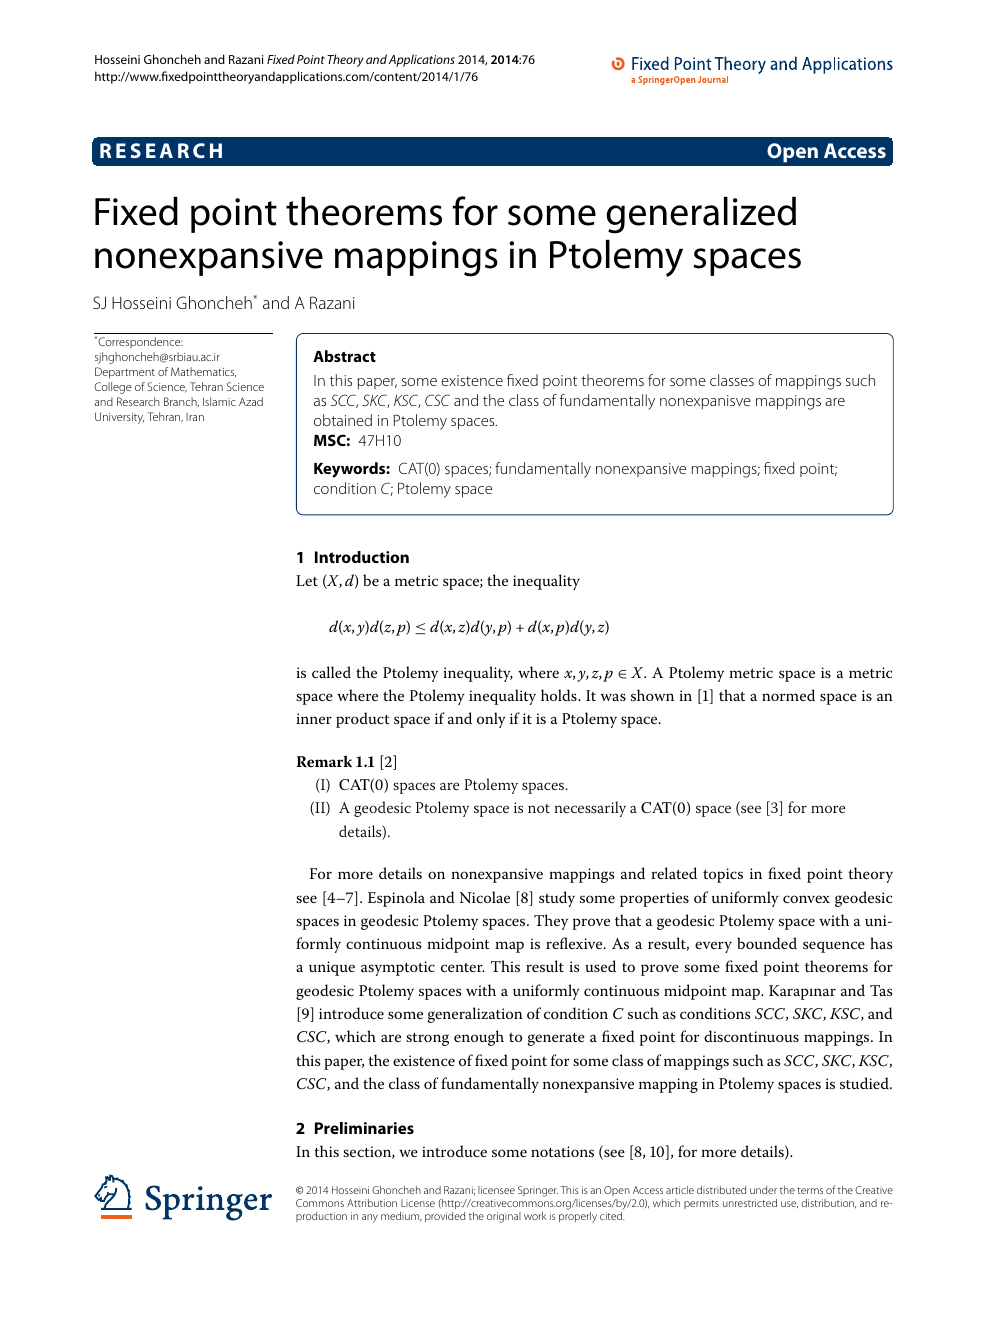 Fixed Point Theorems For Some Generalized Nonexpansive Mappings In Ptolemy Spaces Topic Of Research Paper In Mathematics Download Scholarly Article Pdf And Read For Free On Cyberleninka Open Science Hub